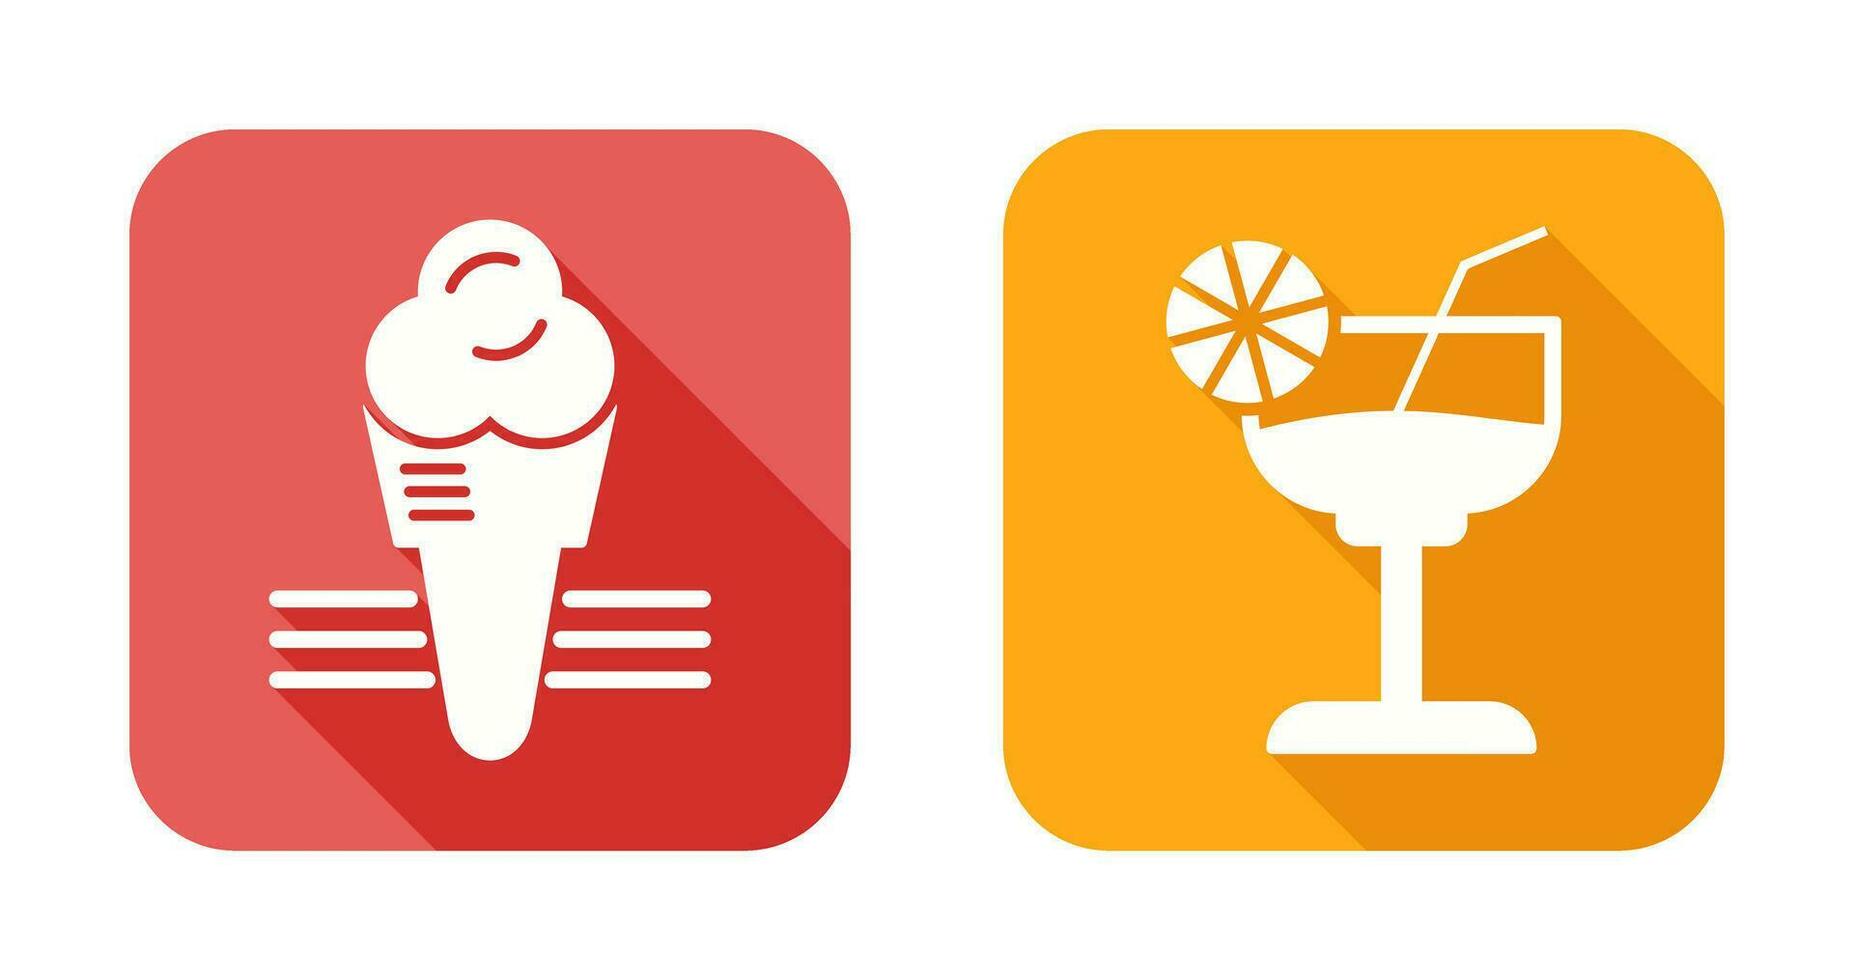 Ice Cream and Cocktail Icon vector